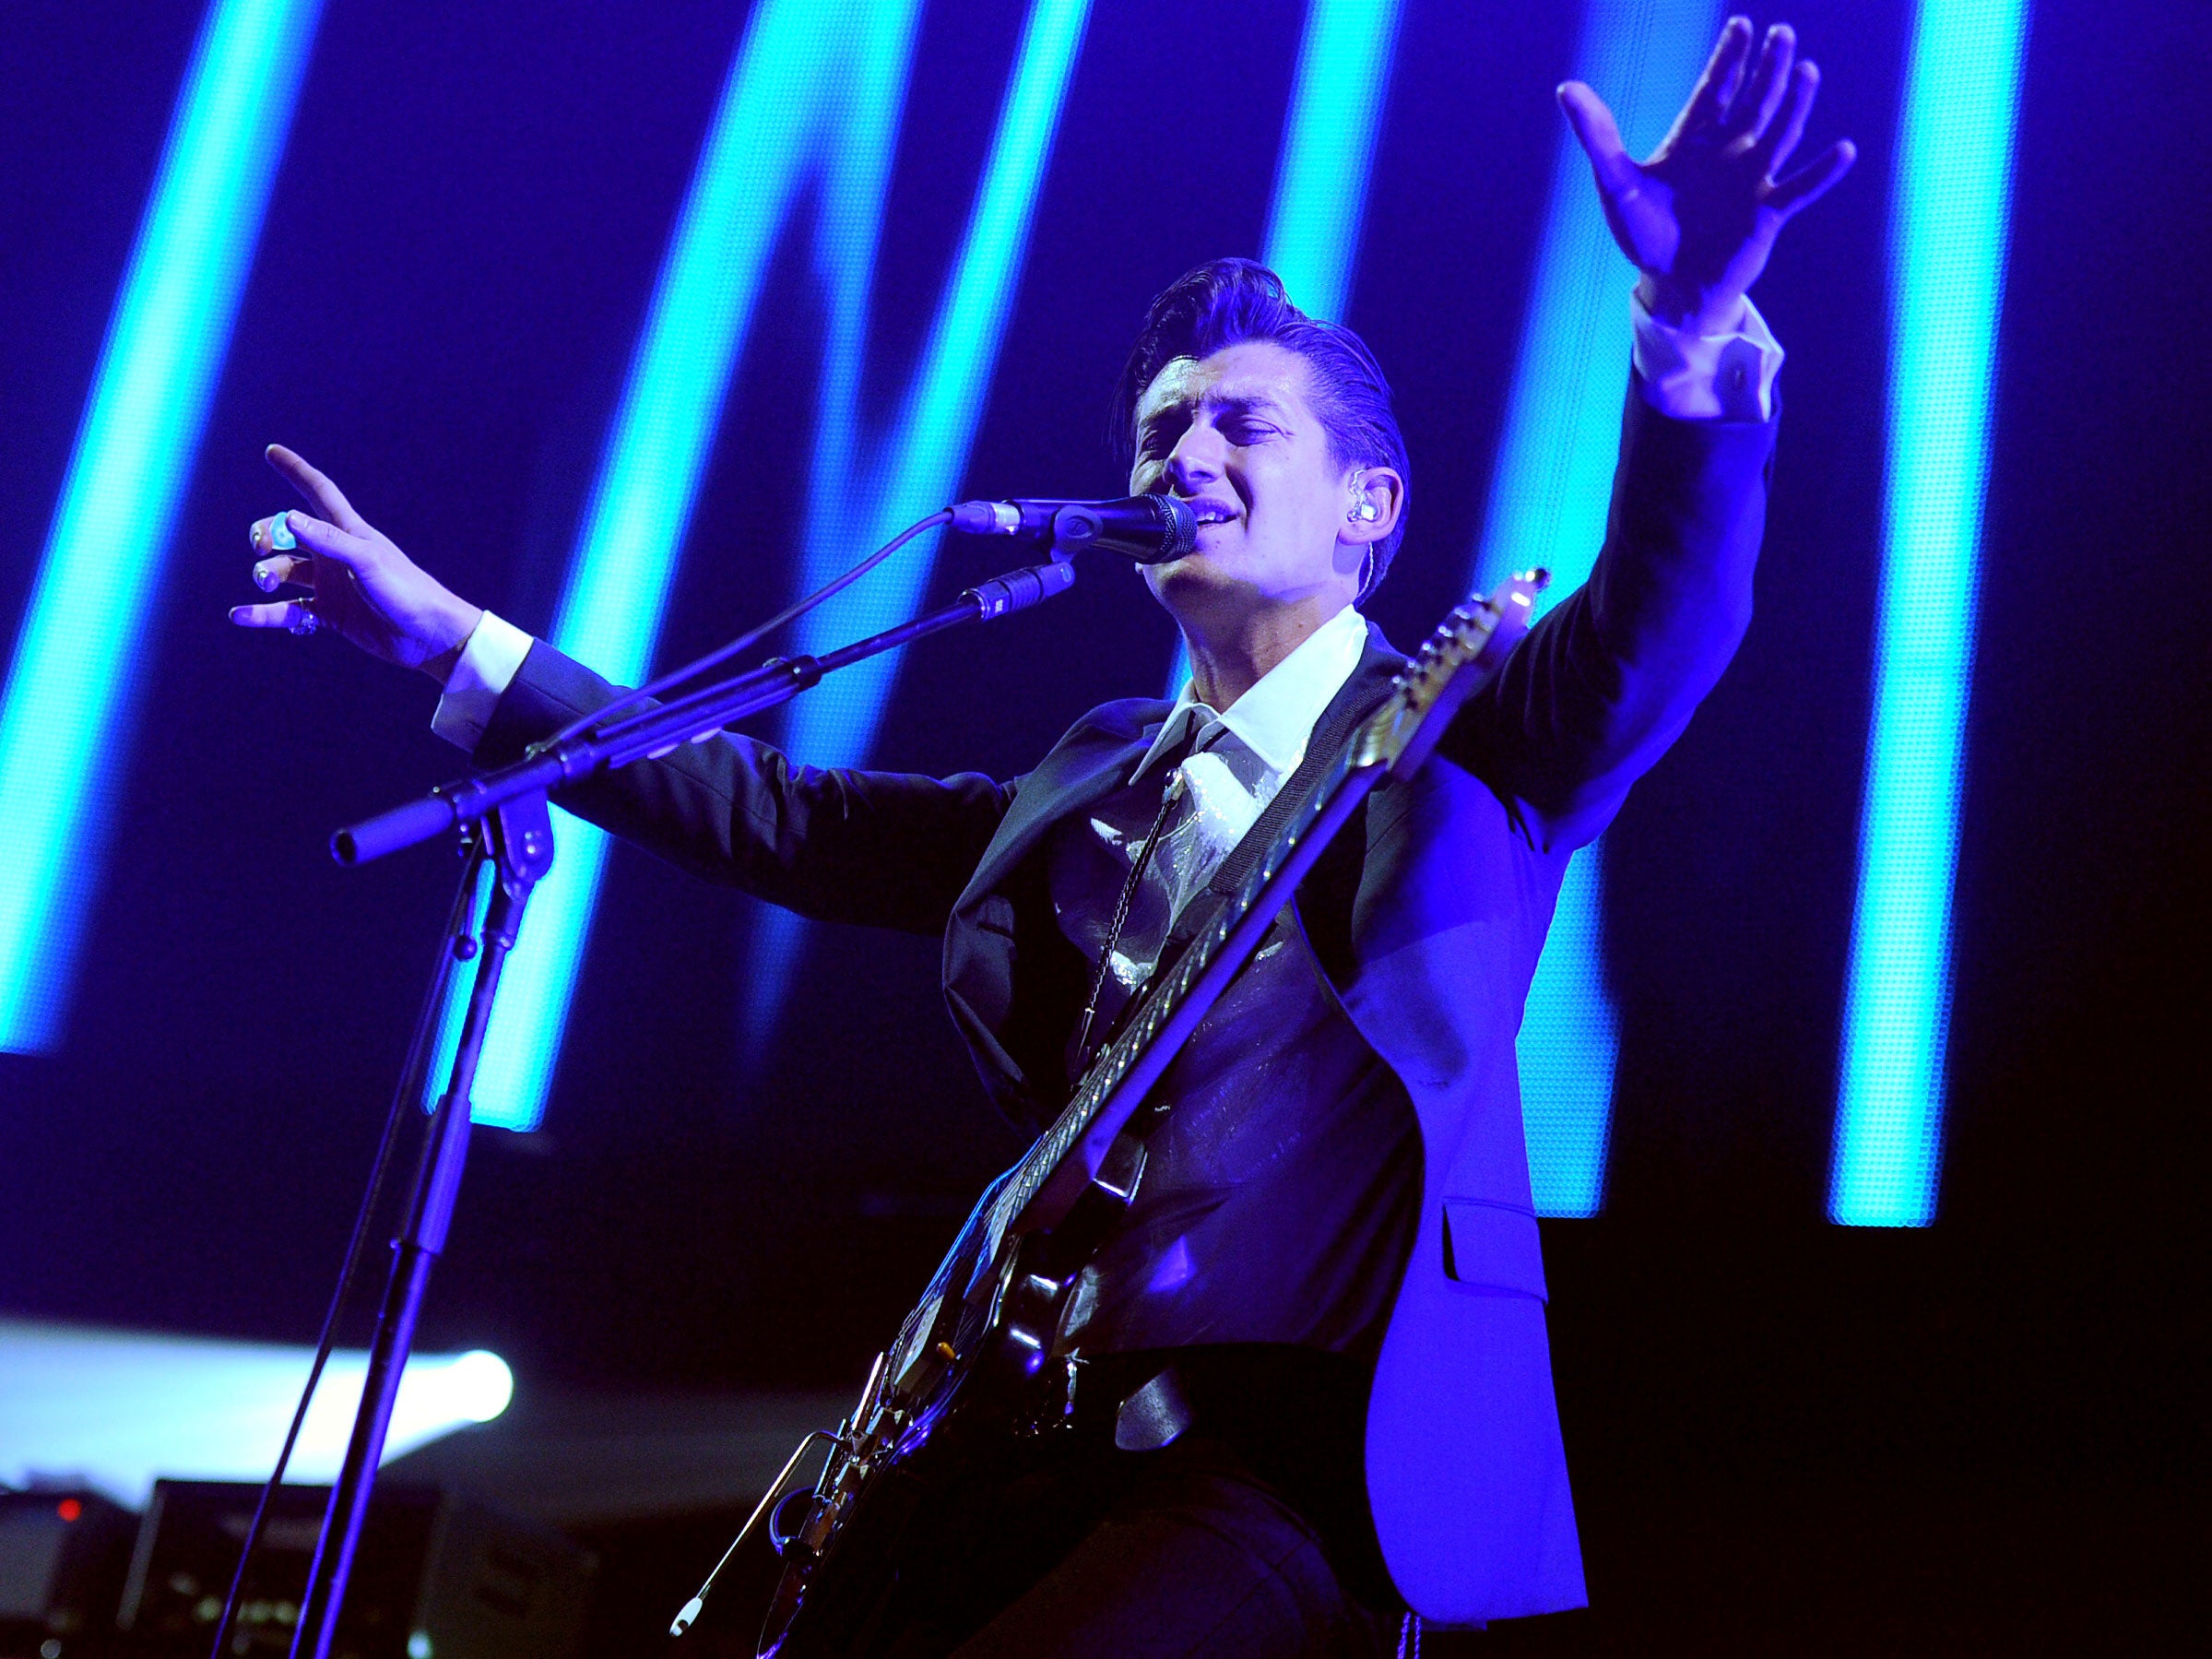 Musician Alex Turner of Arctic Monkeys performs onstage during The 24th Annual KROQ Almost Acoustic Christmas at The Shrine Auditorium on December 7, 2013 in Los Angeles, California.